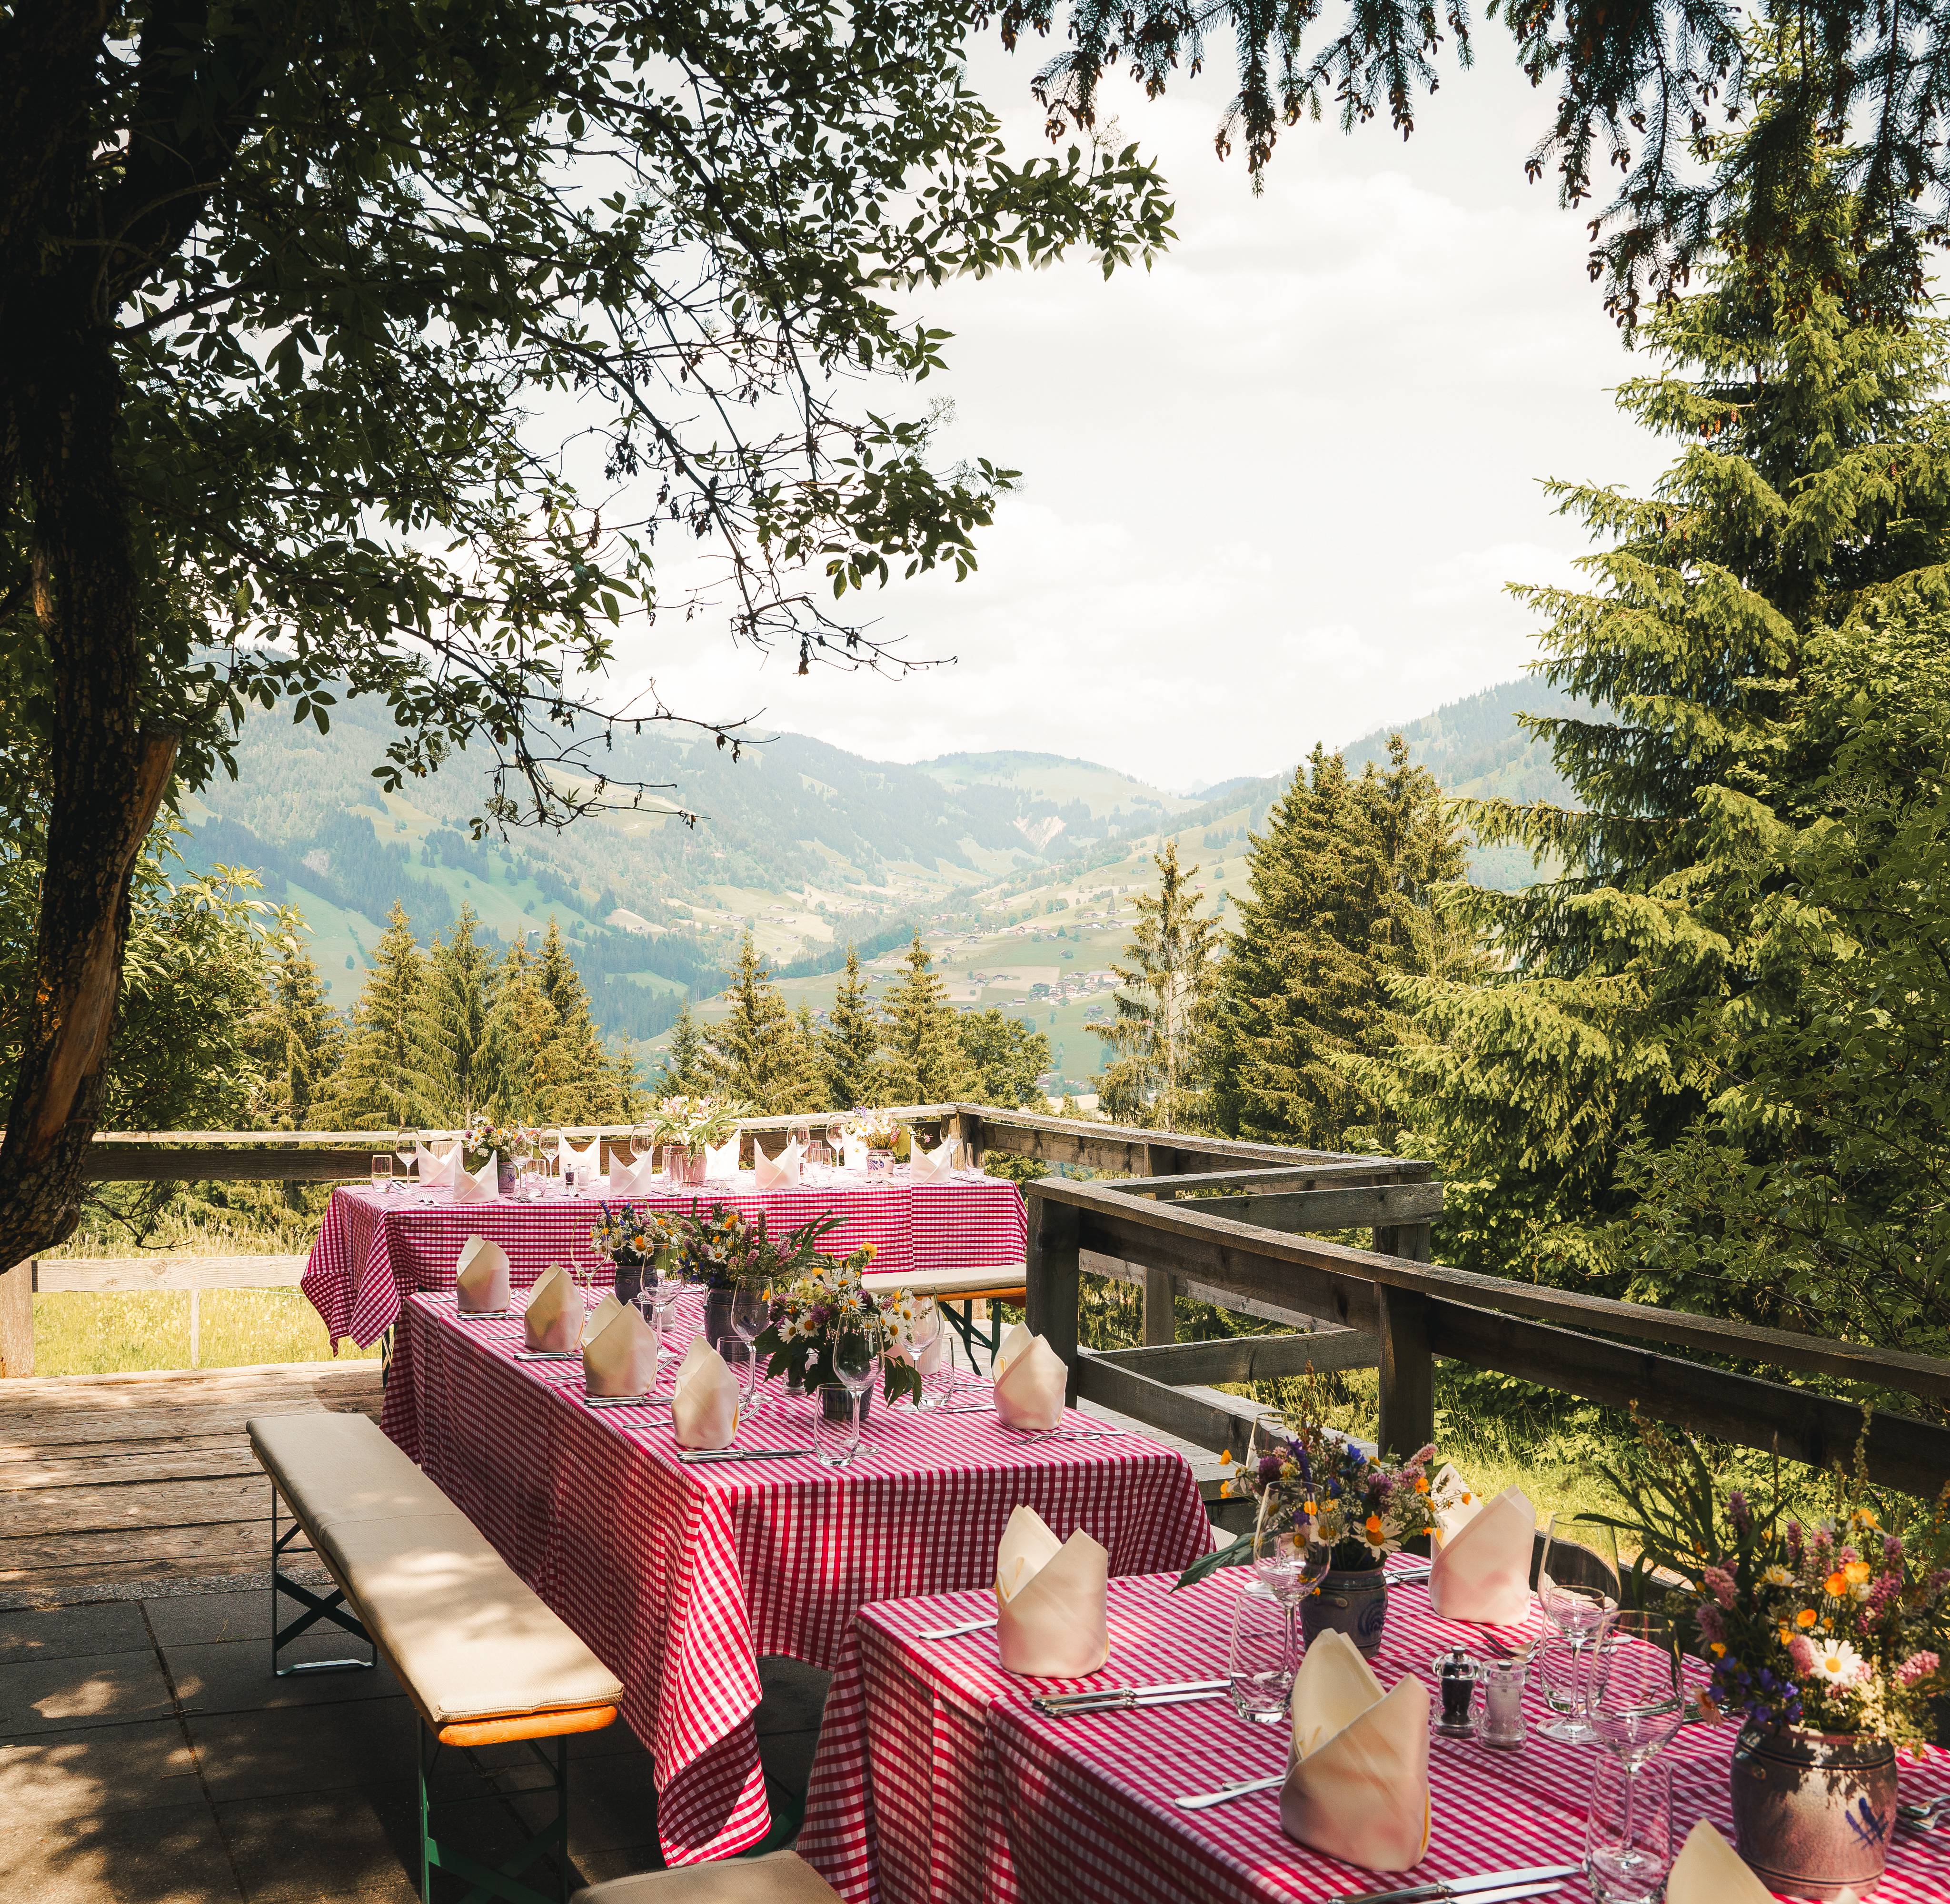 Catering in the mountains: Alpine hut catering in Gstaad - Hotel Gstaaderhof